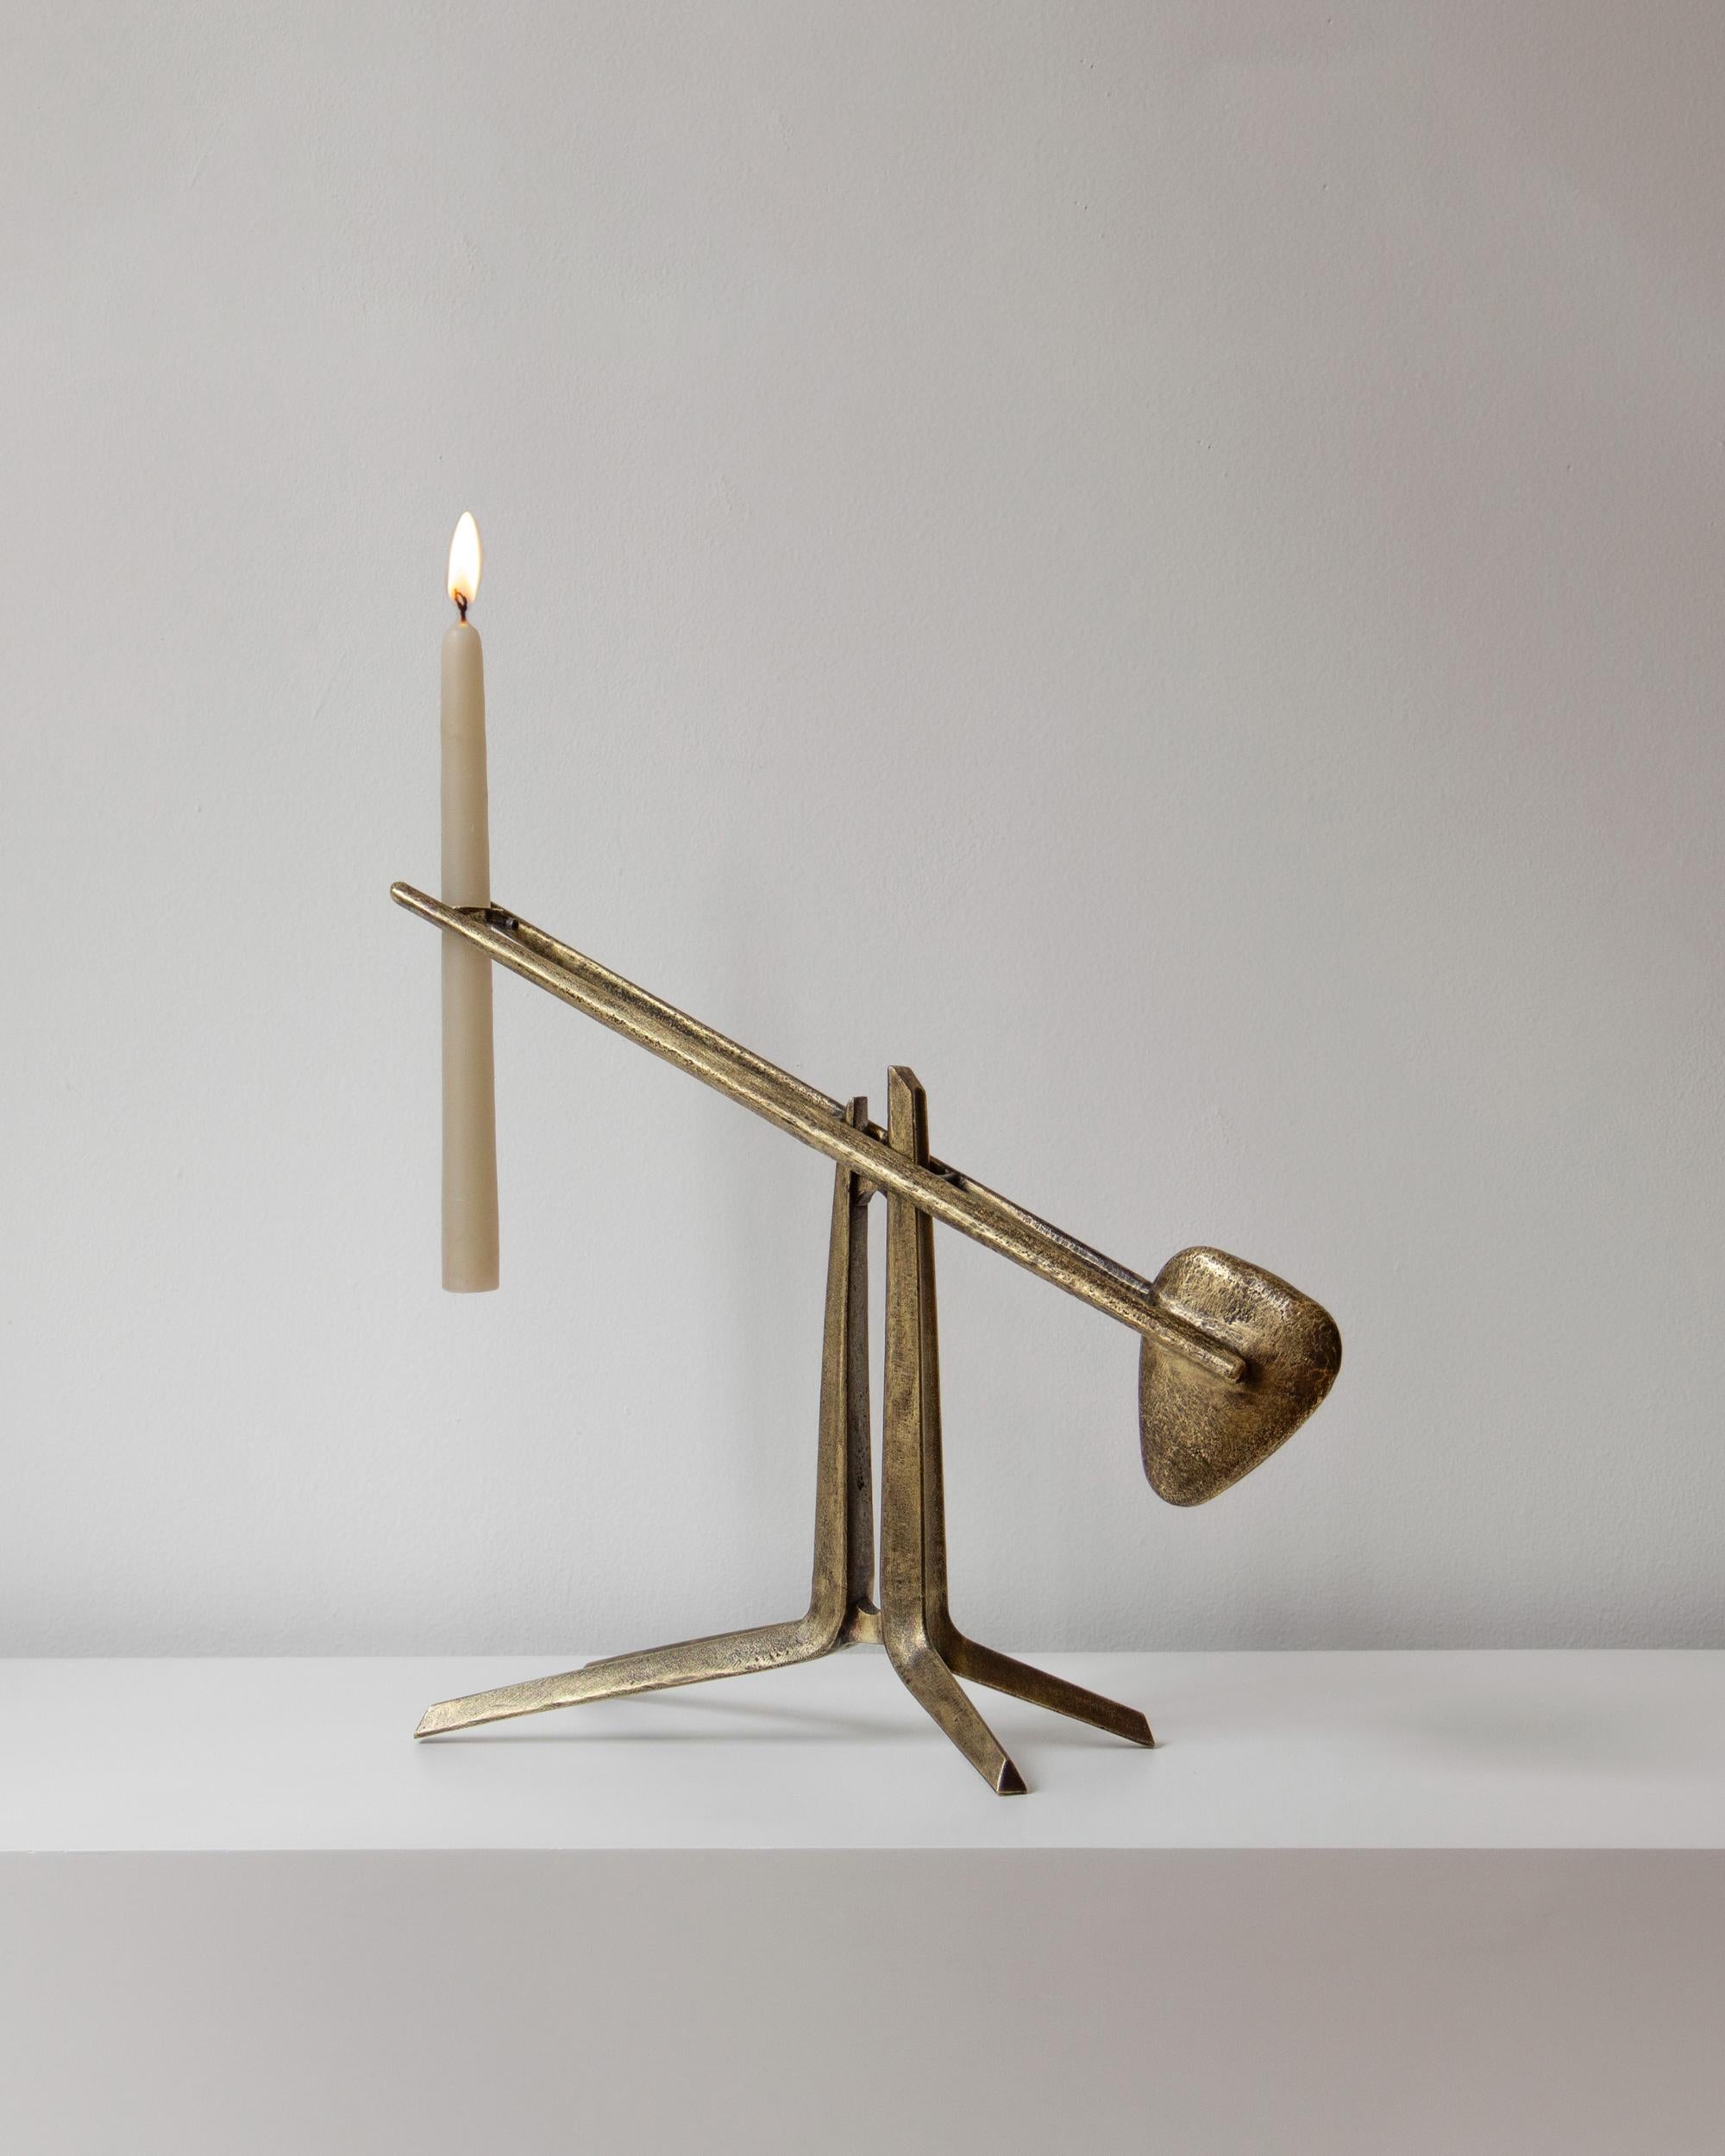 Temis Candle Holder by Federico Stefanovich
Dimensions: D 12 x W 40 x H 32 cm
Material: Bronze

Temis is a re-edited piece sand casted in solid bronze. It is then welded, ground
and brushed to highlight the imperfections of the process itself. As a